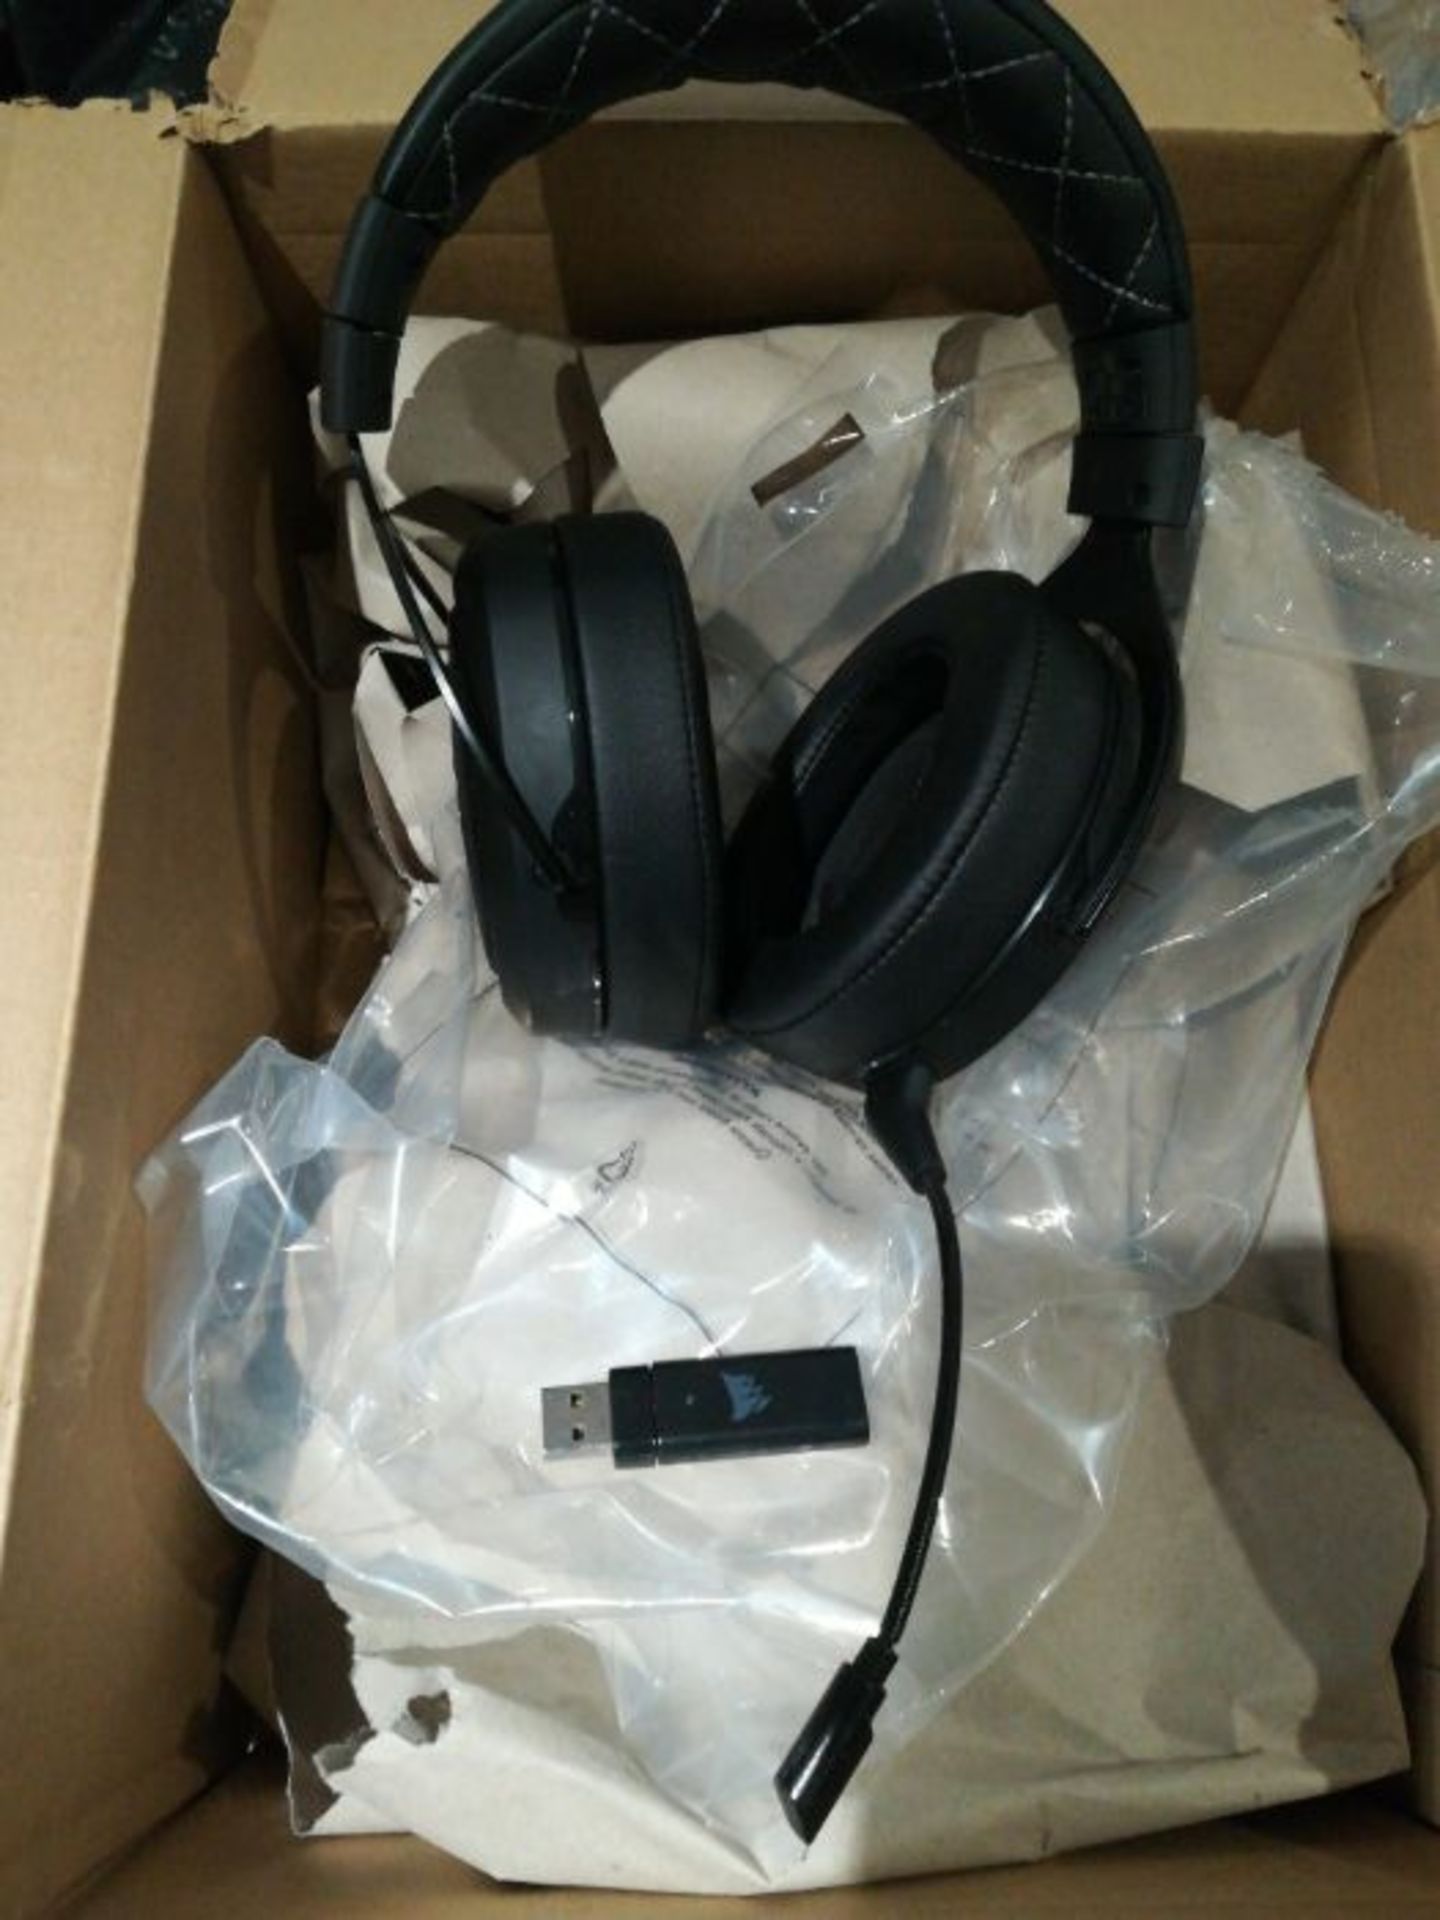 RRP £77.00 Corsair HS70 Wireless Gaming Headset with 7.1 Surround Sound - Carbon,CA-9011175-EU - Image 2 of 2